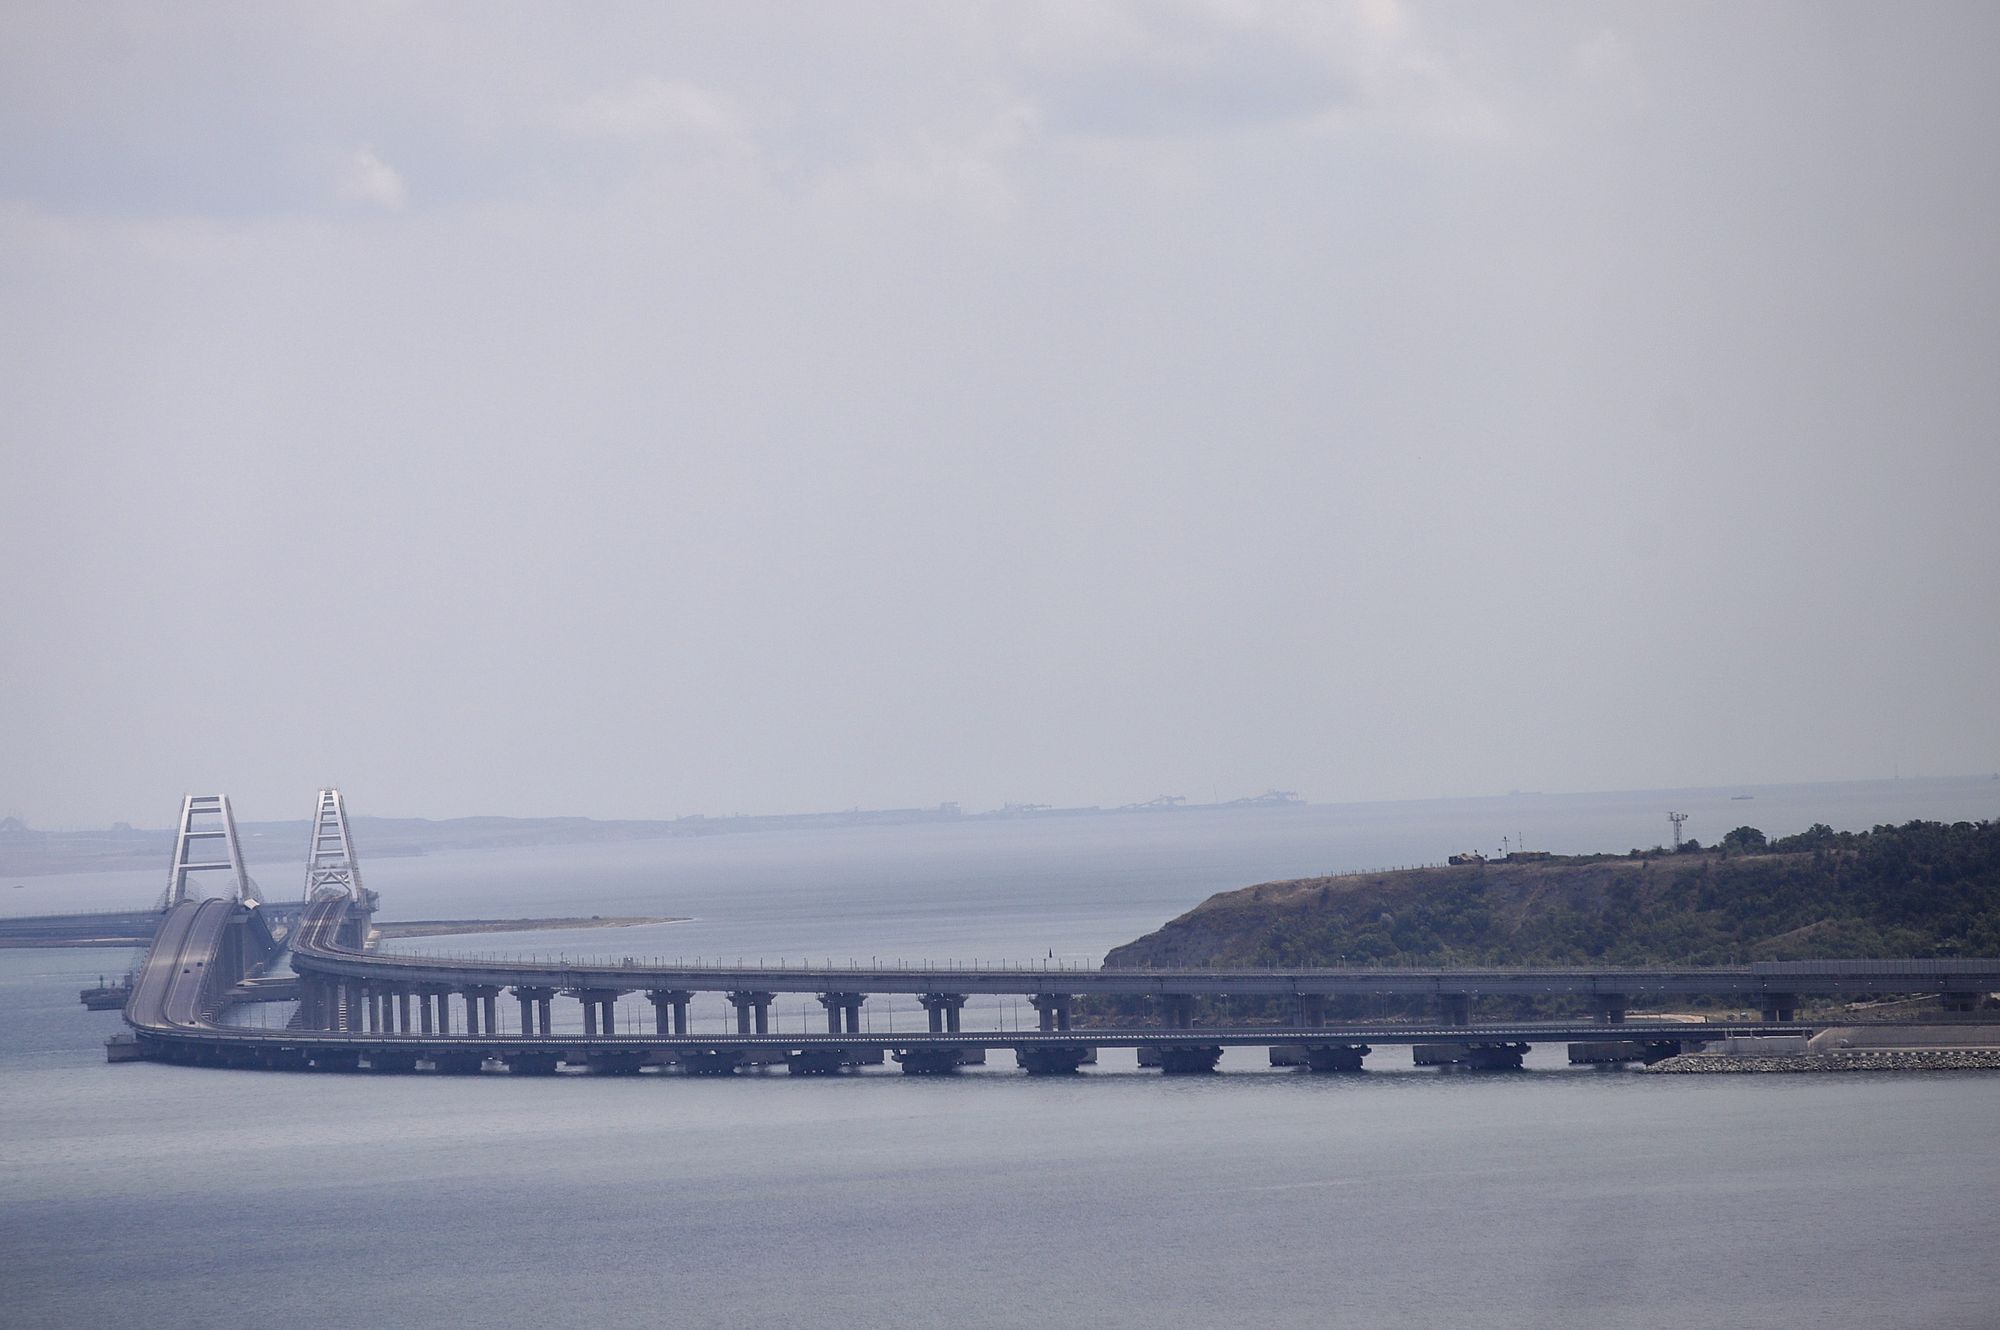 Military intelligence: Russia sinking ferries in attempt to protect Crimean Bridge